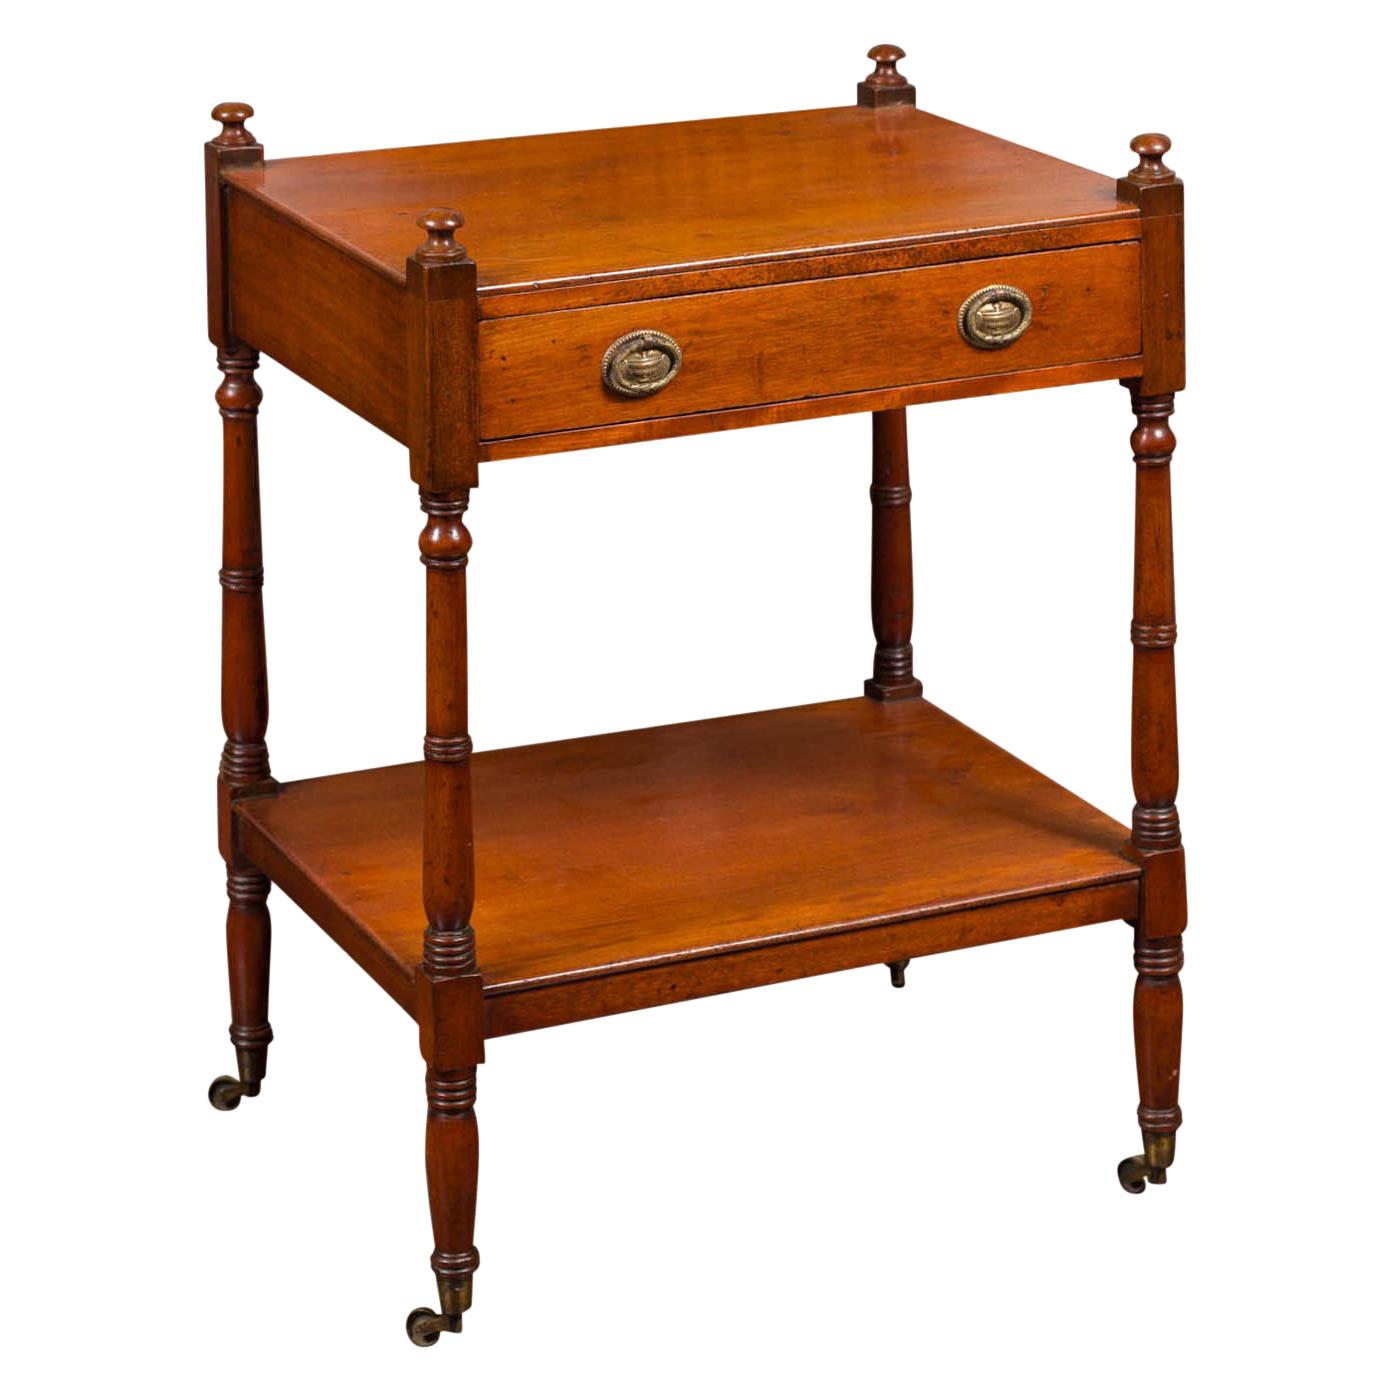 English 1880s Mahogany Trolley with Single Drawer, Lower Shelf and Casters